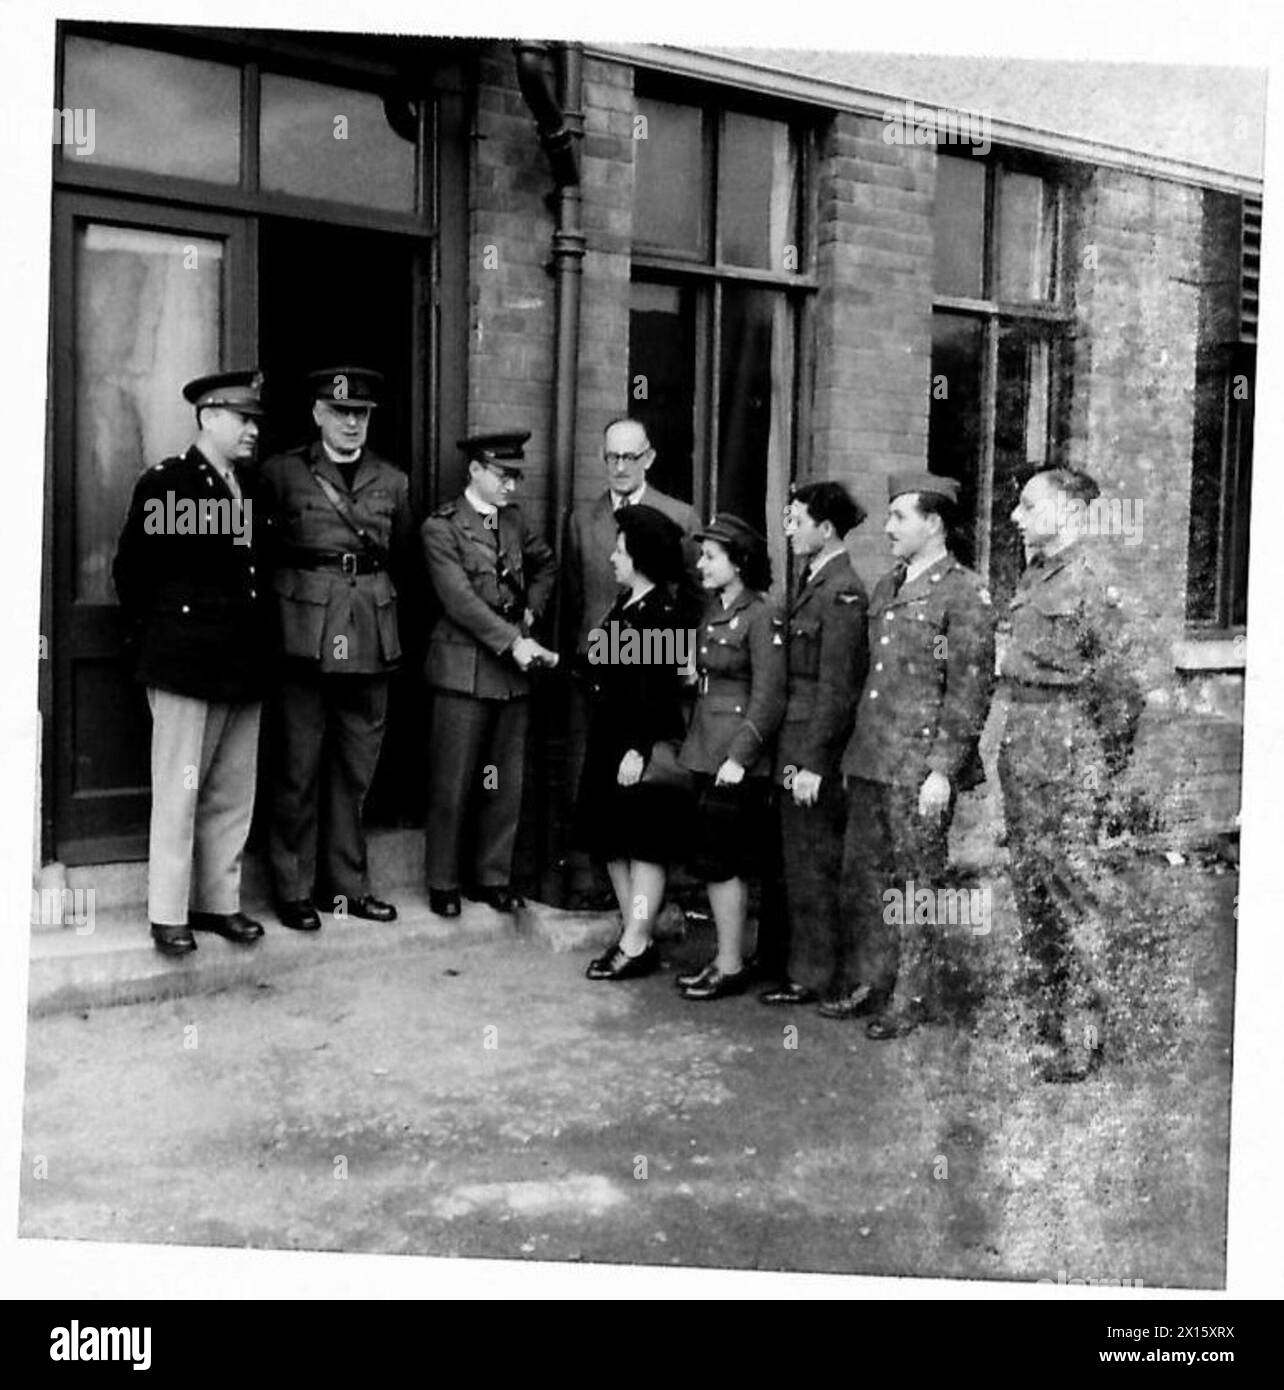 FEAST OF THE PASSOVER IN BELFAST - Rev. Simeon Isaacs, CF receiving Jewish personnel from US5 and British Armies when they arrived for the Passover. He is shaking hands with 2nd Lt.Alice Newfield of the US Army Nursing Corps, next is Pte. R. Haymen, ATS of Glasgow. On the left are Chaplain W.G. Davies USA and Rev.I.K.Aitken, DACG British Army Stock Photo